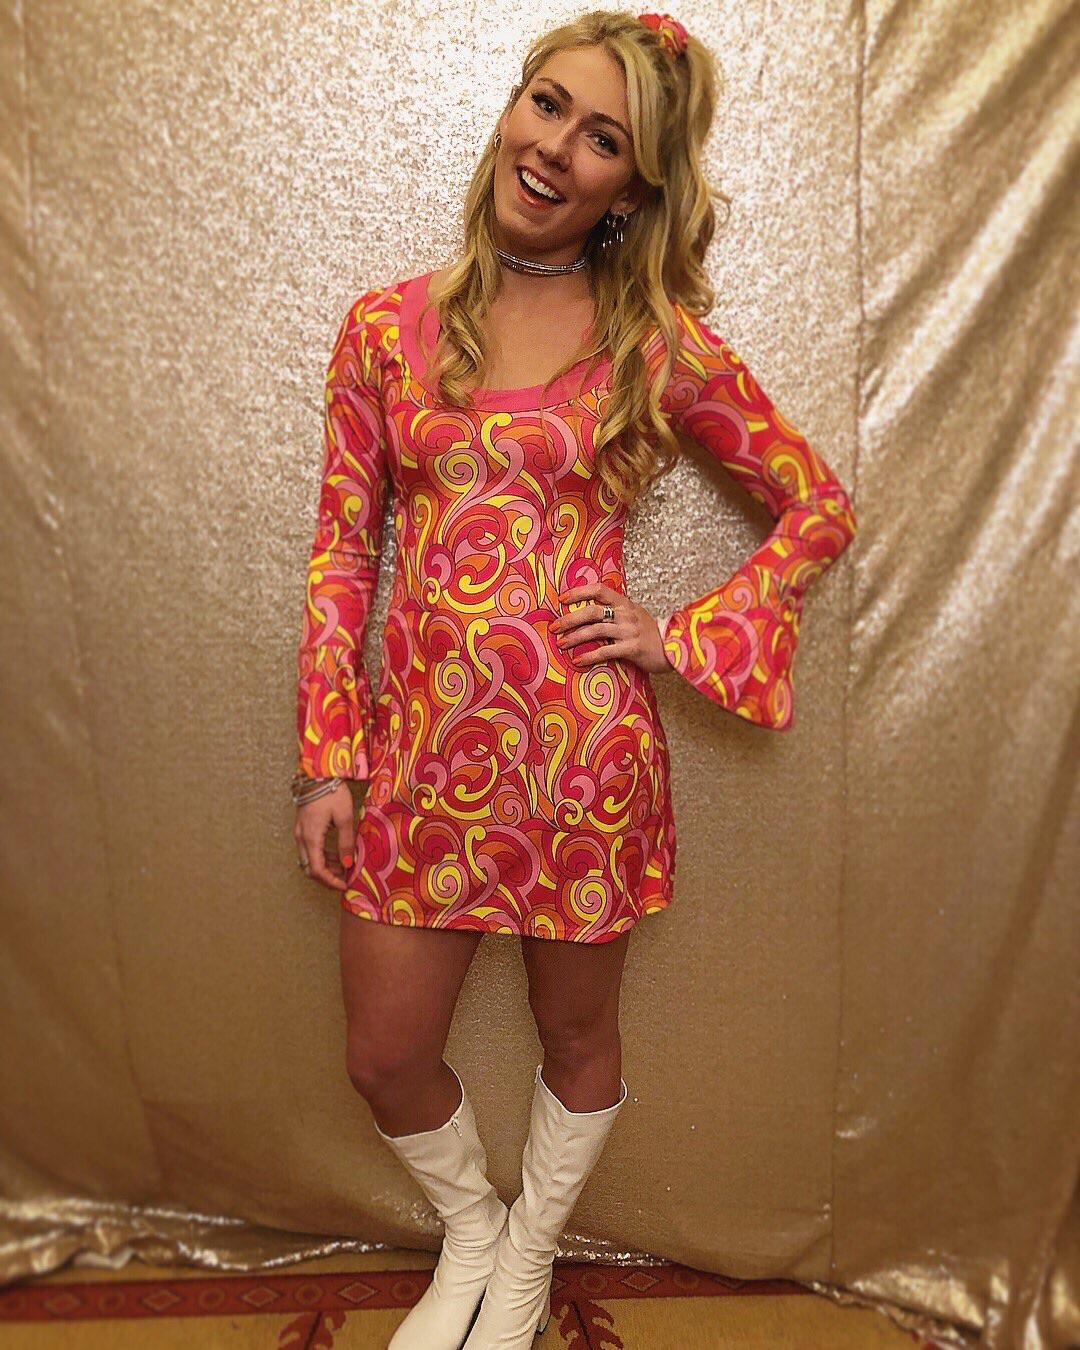 Mikaela Shiffrin At 70s Themed Party Last Nigh